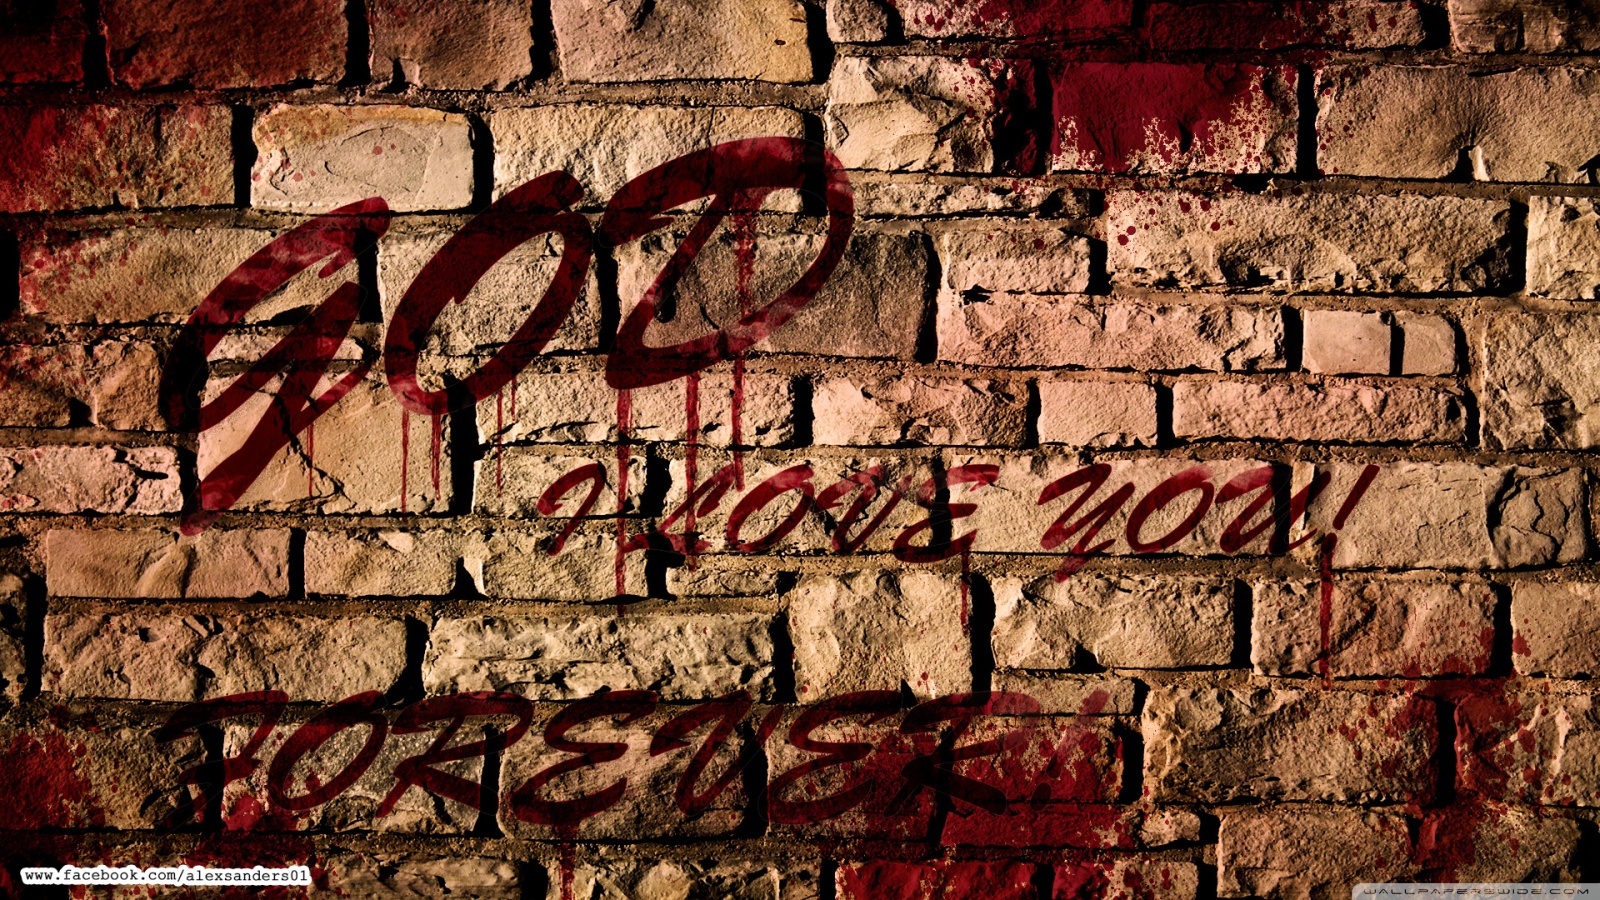 i love you wallpaper hd for mobile,brickwork,brick,wall,text,red